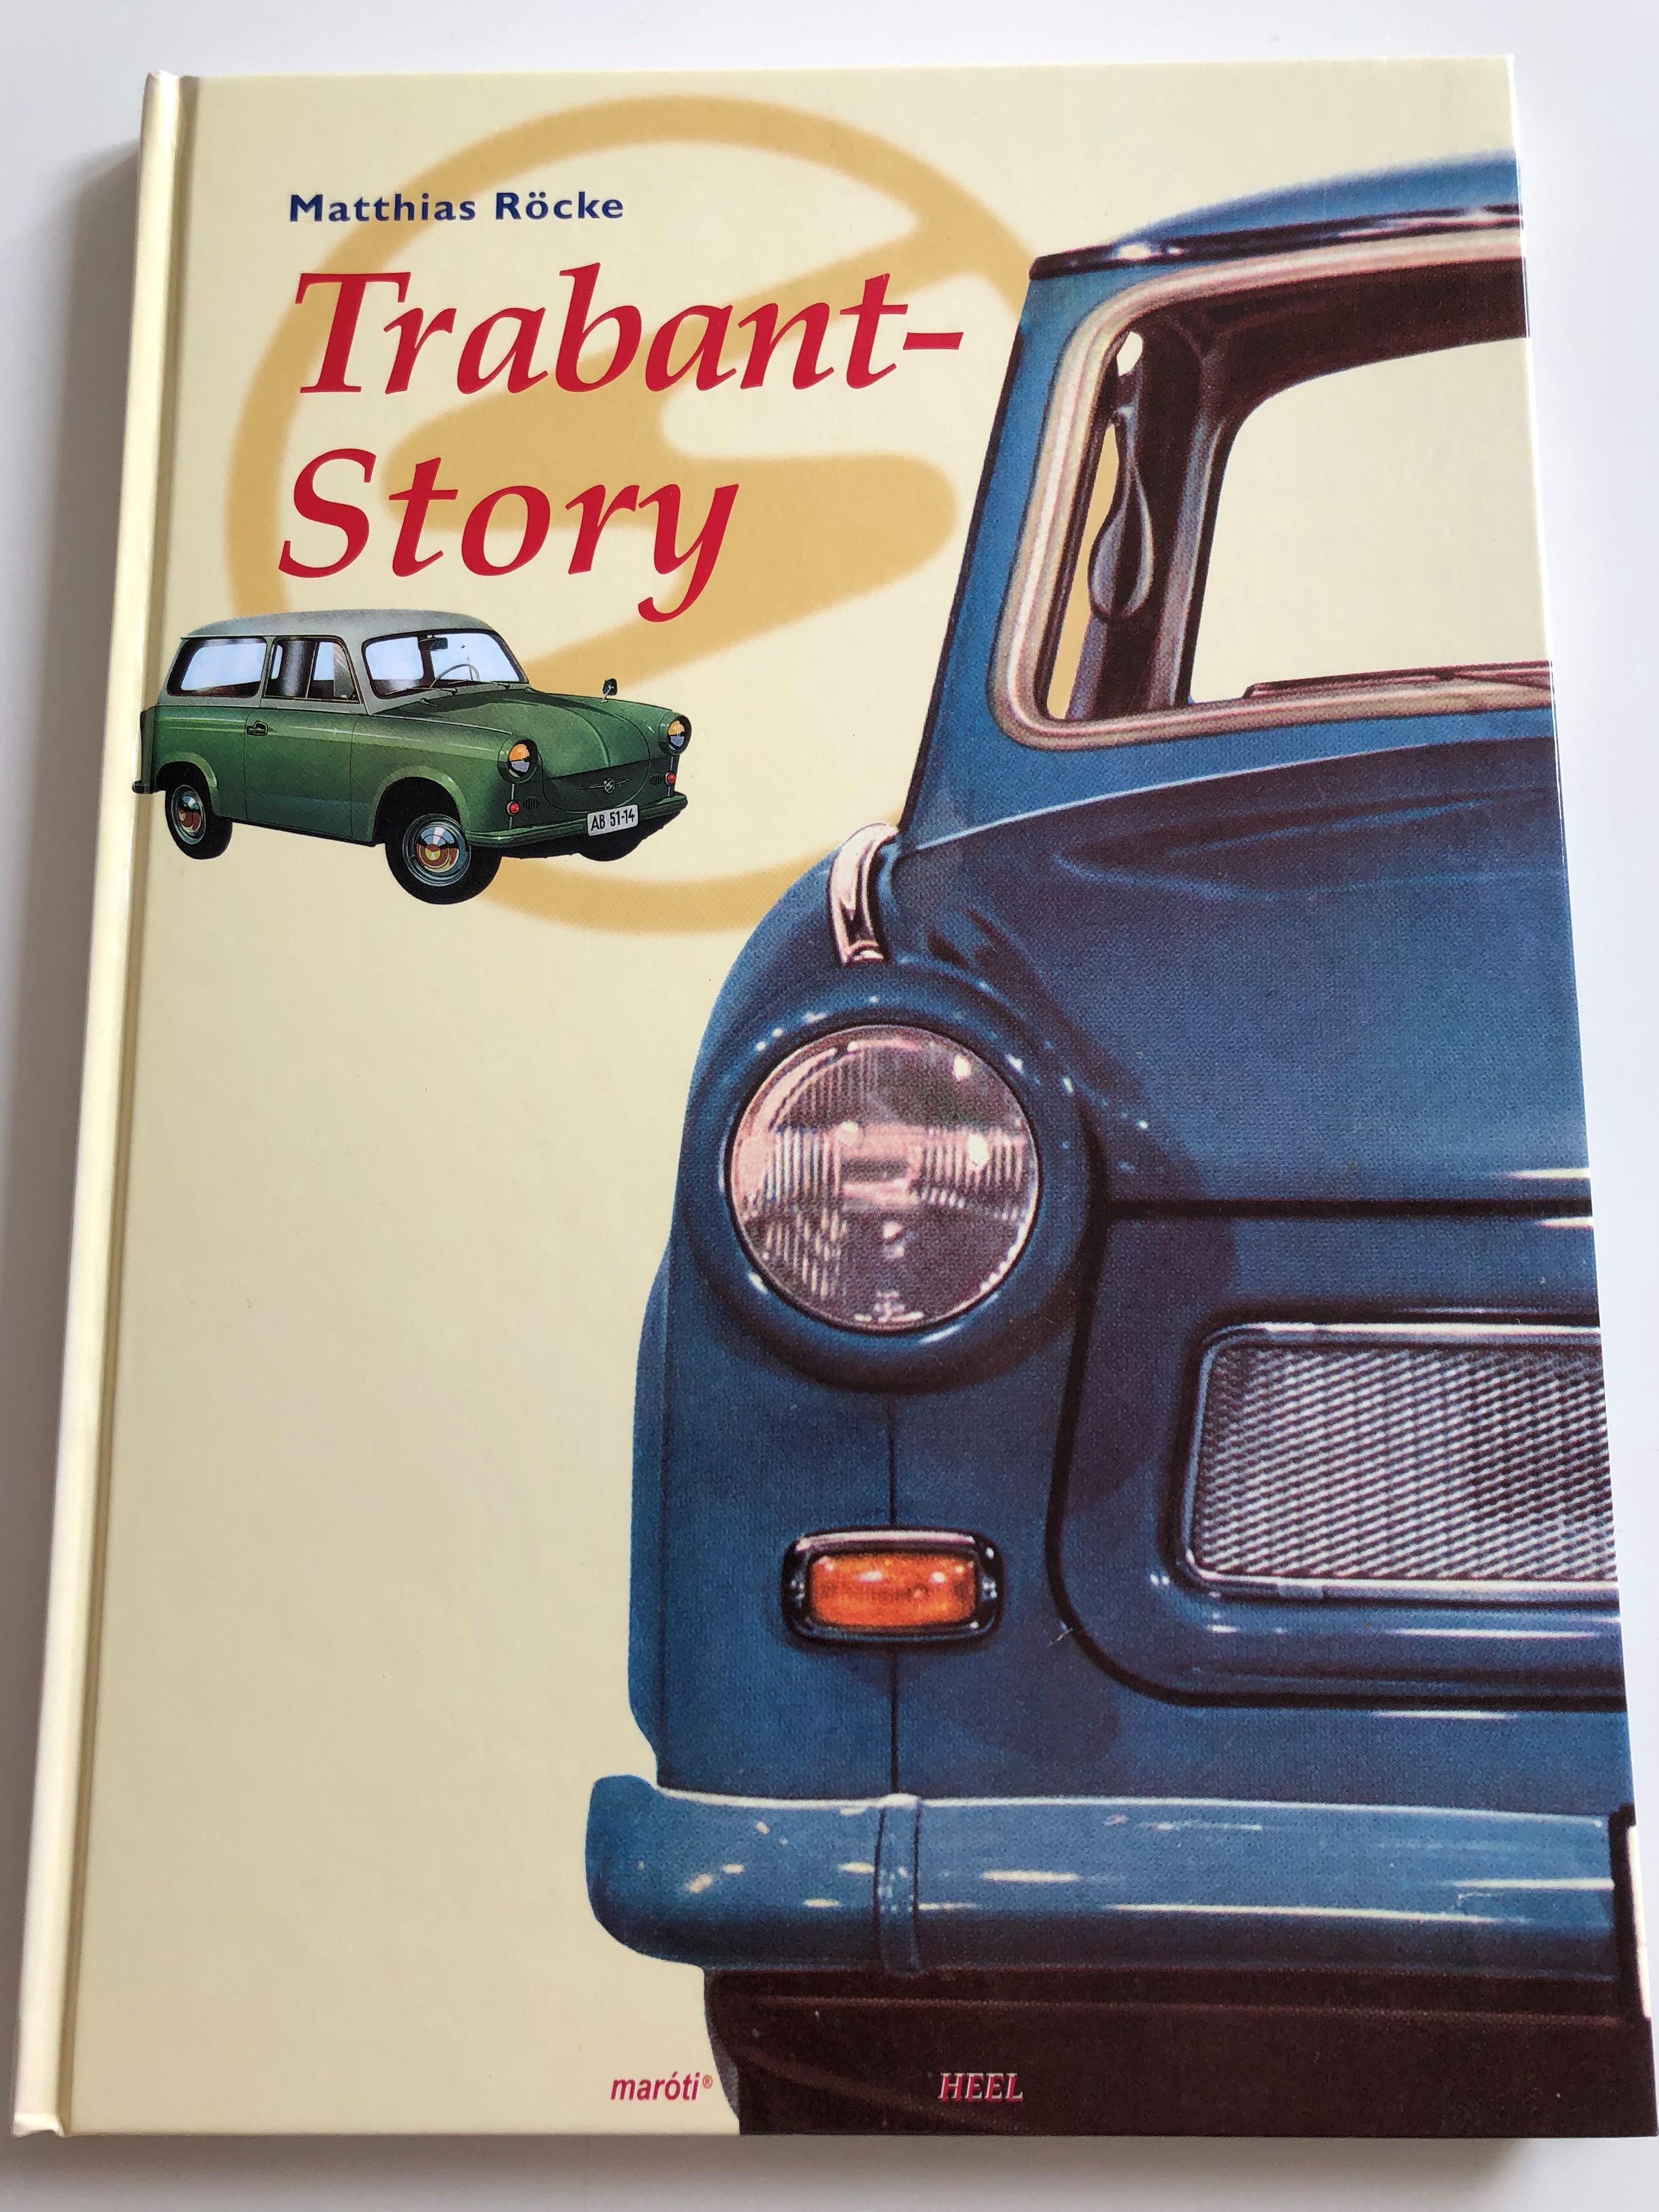 trabant-story-by-matthias-r-cke-hungarian-edition-of-die-trabi-story-trabant-the-popular-east-german-car-history-culture-technical-details-hardcover-2007-mar-ti-k-nyvkiad-1-.jpg